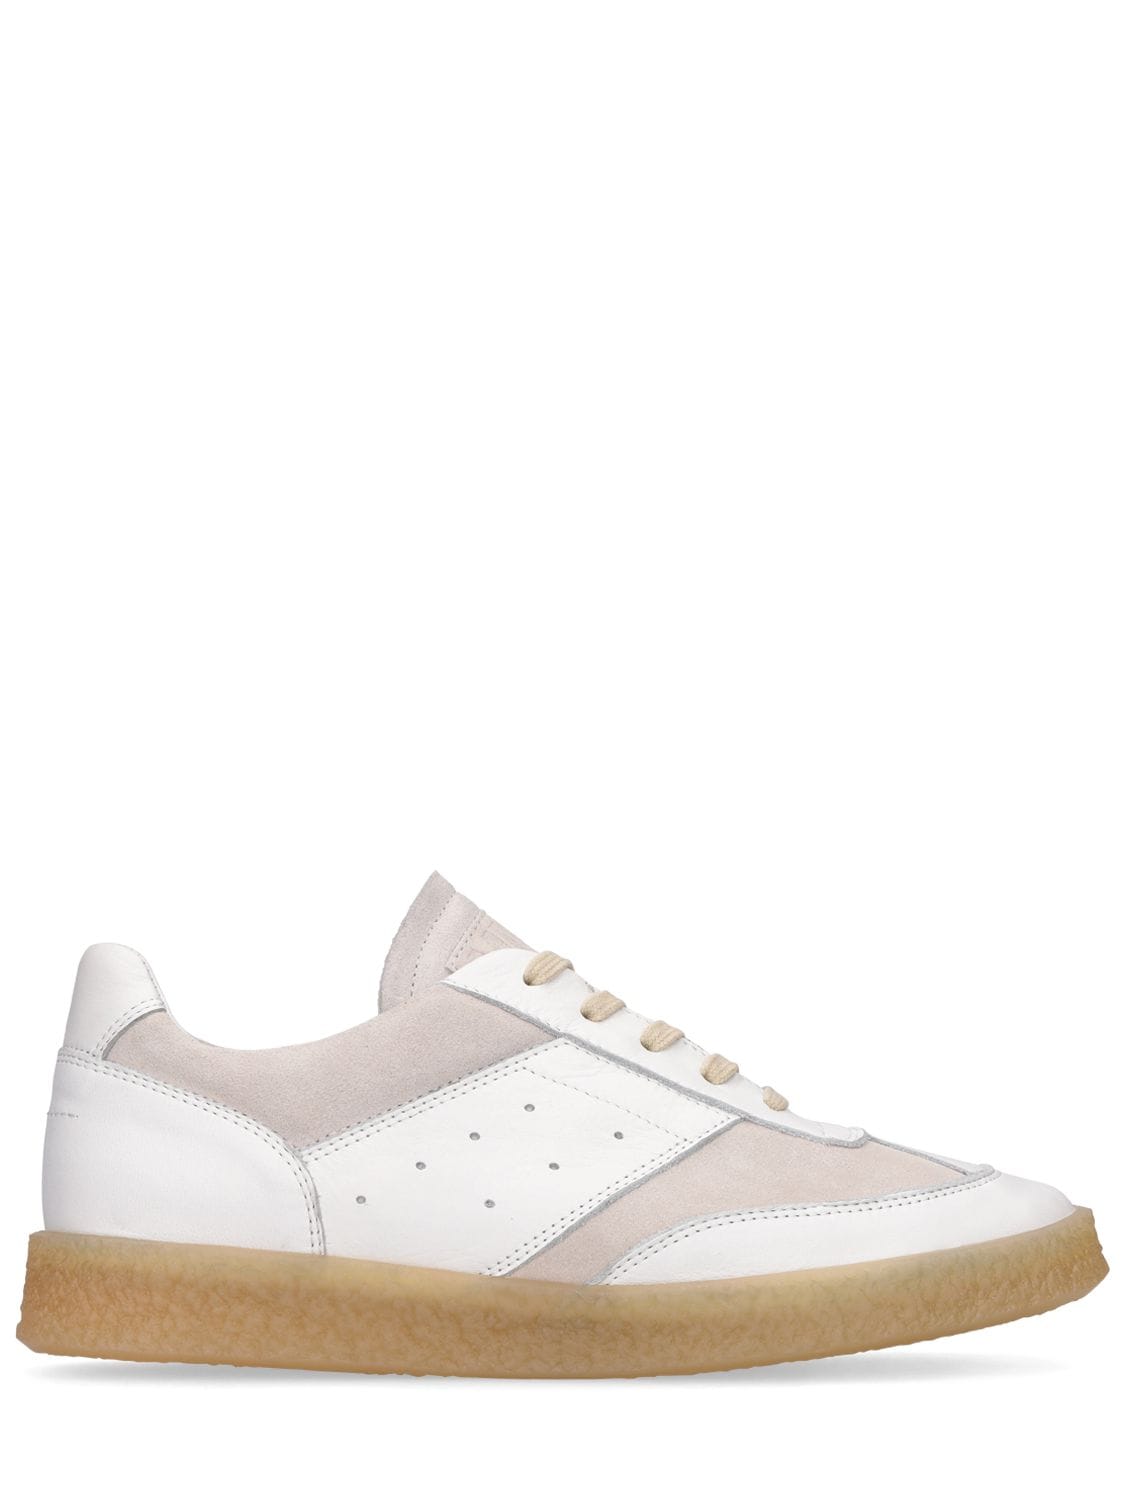 Mm6 Maison Margiela Leather Low Top Trainers In White,grey